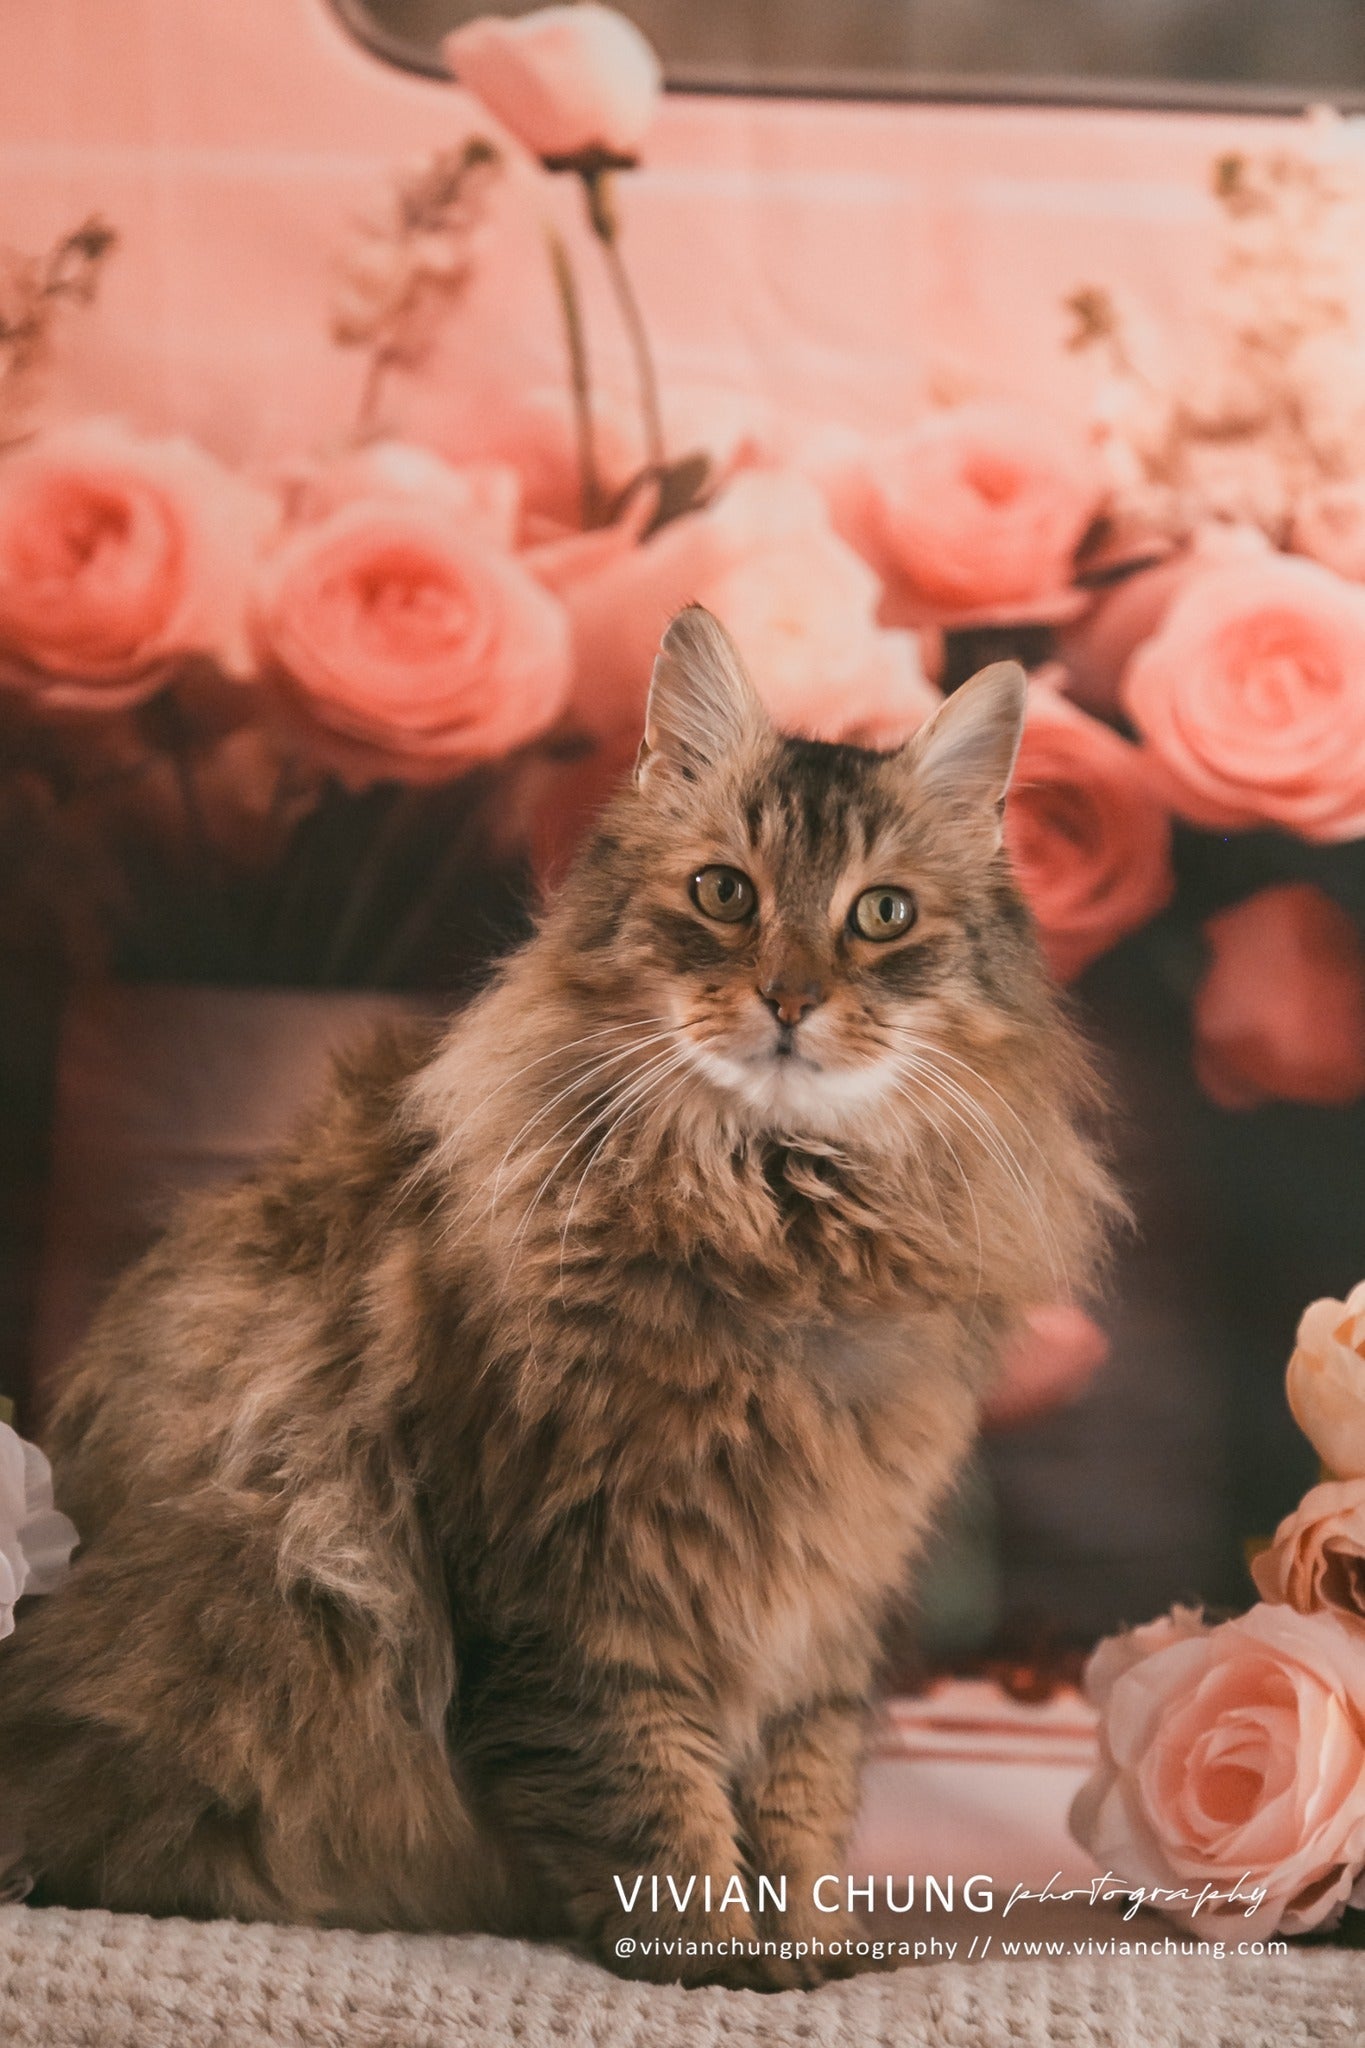 Kate Pet Valentine's Day Pink Flowers Truck Backdrop Designed by Chain Photography